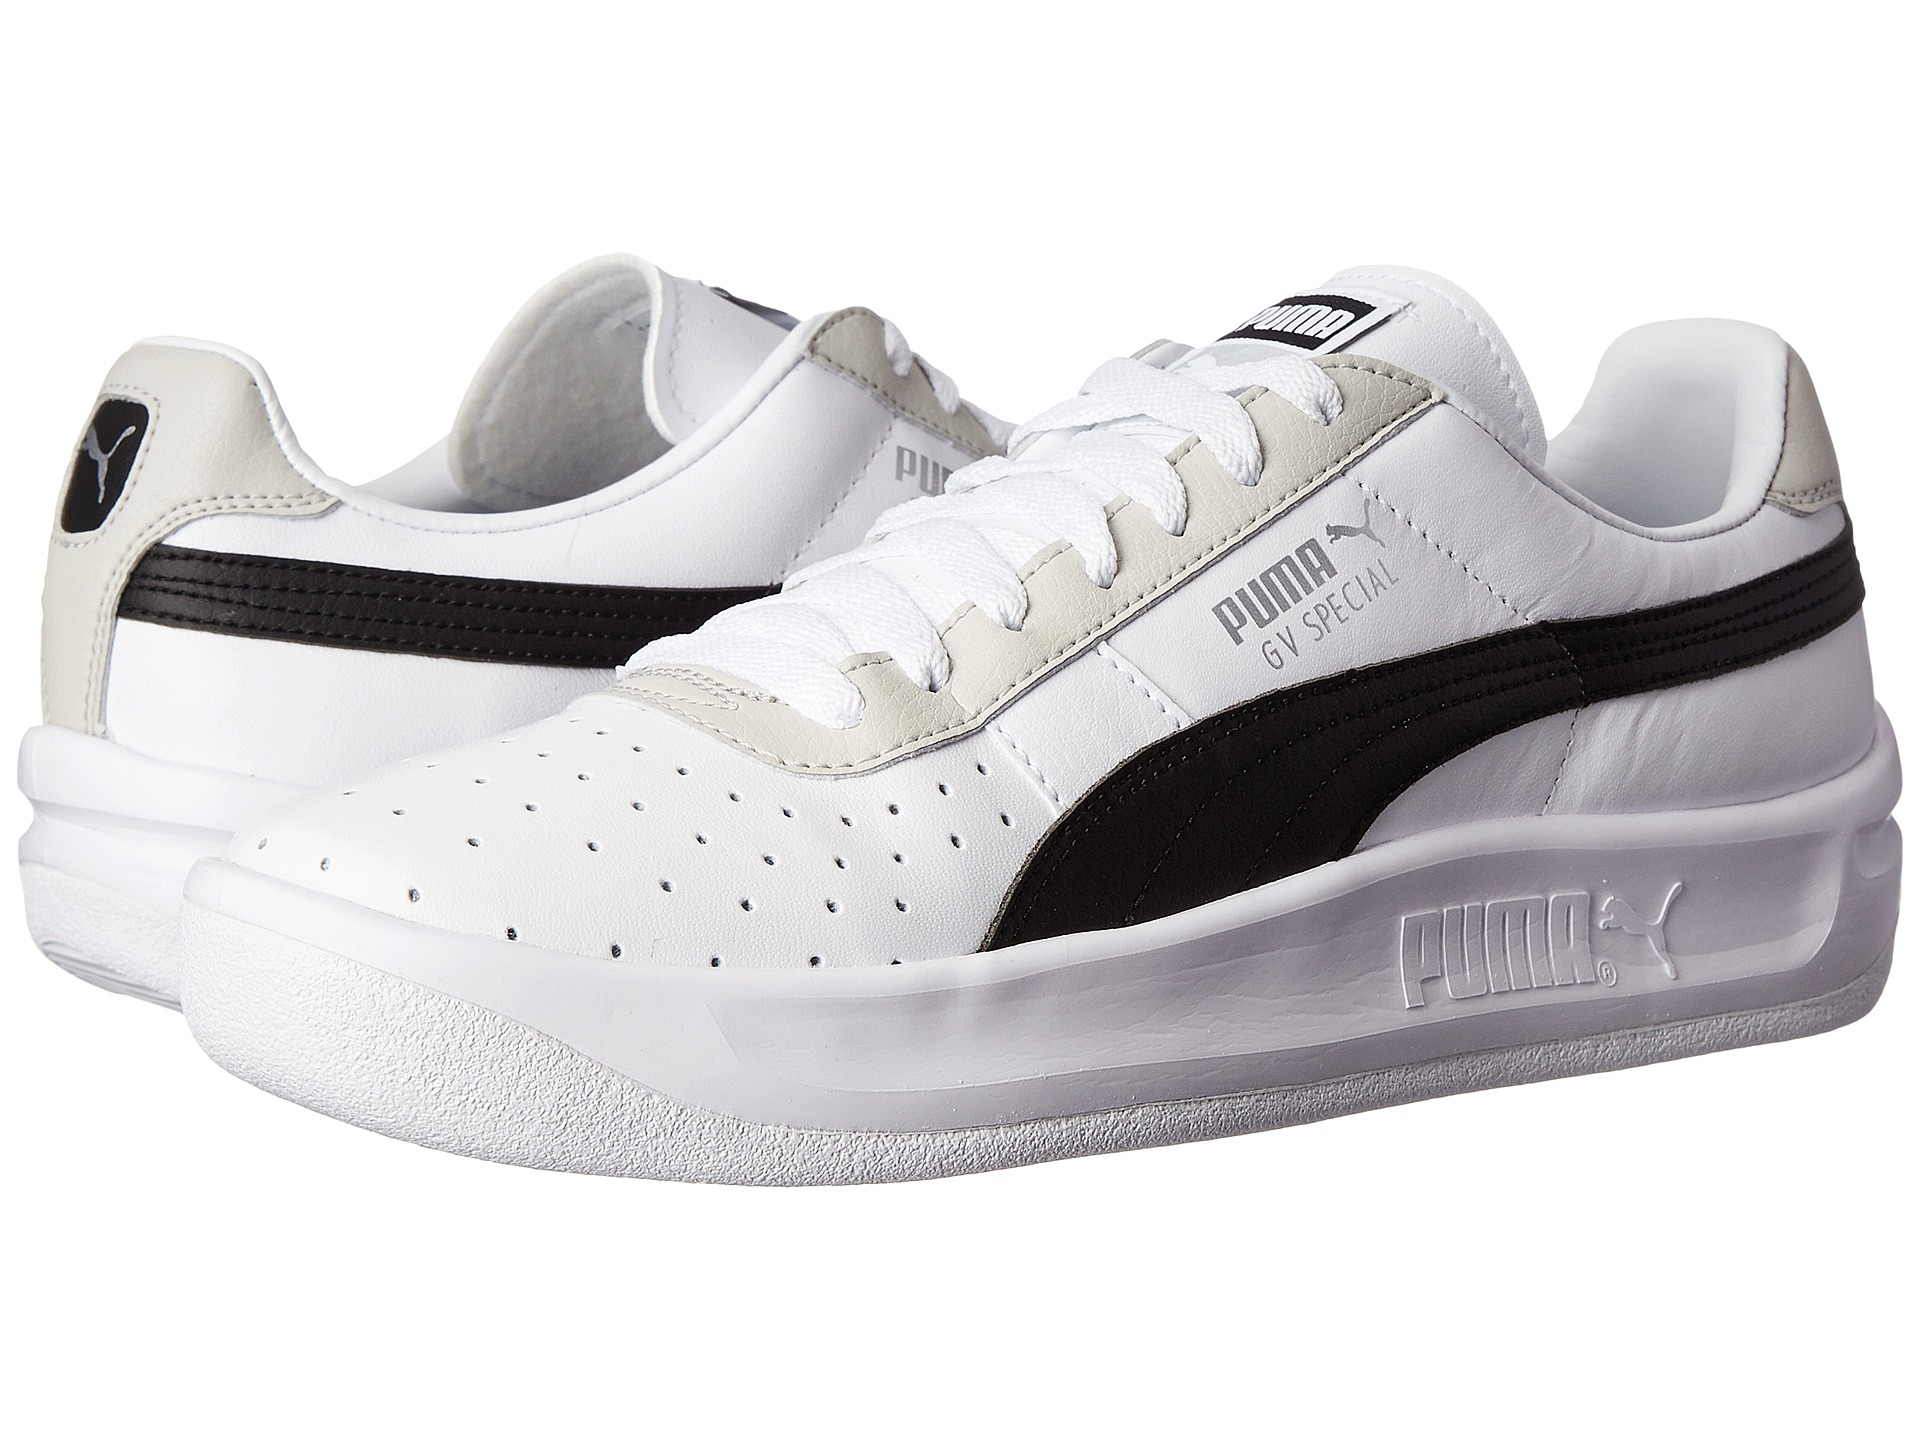 PUMA Gv Special in White for Men - Lyst